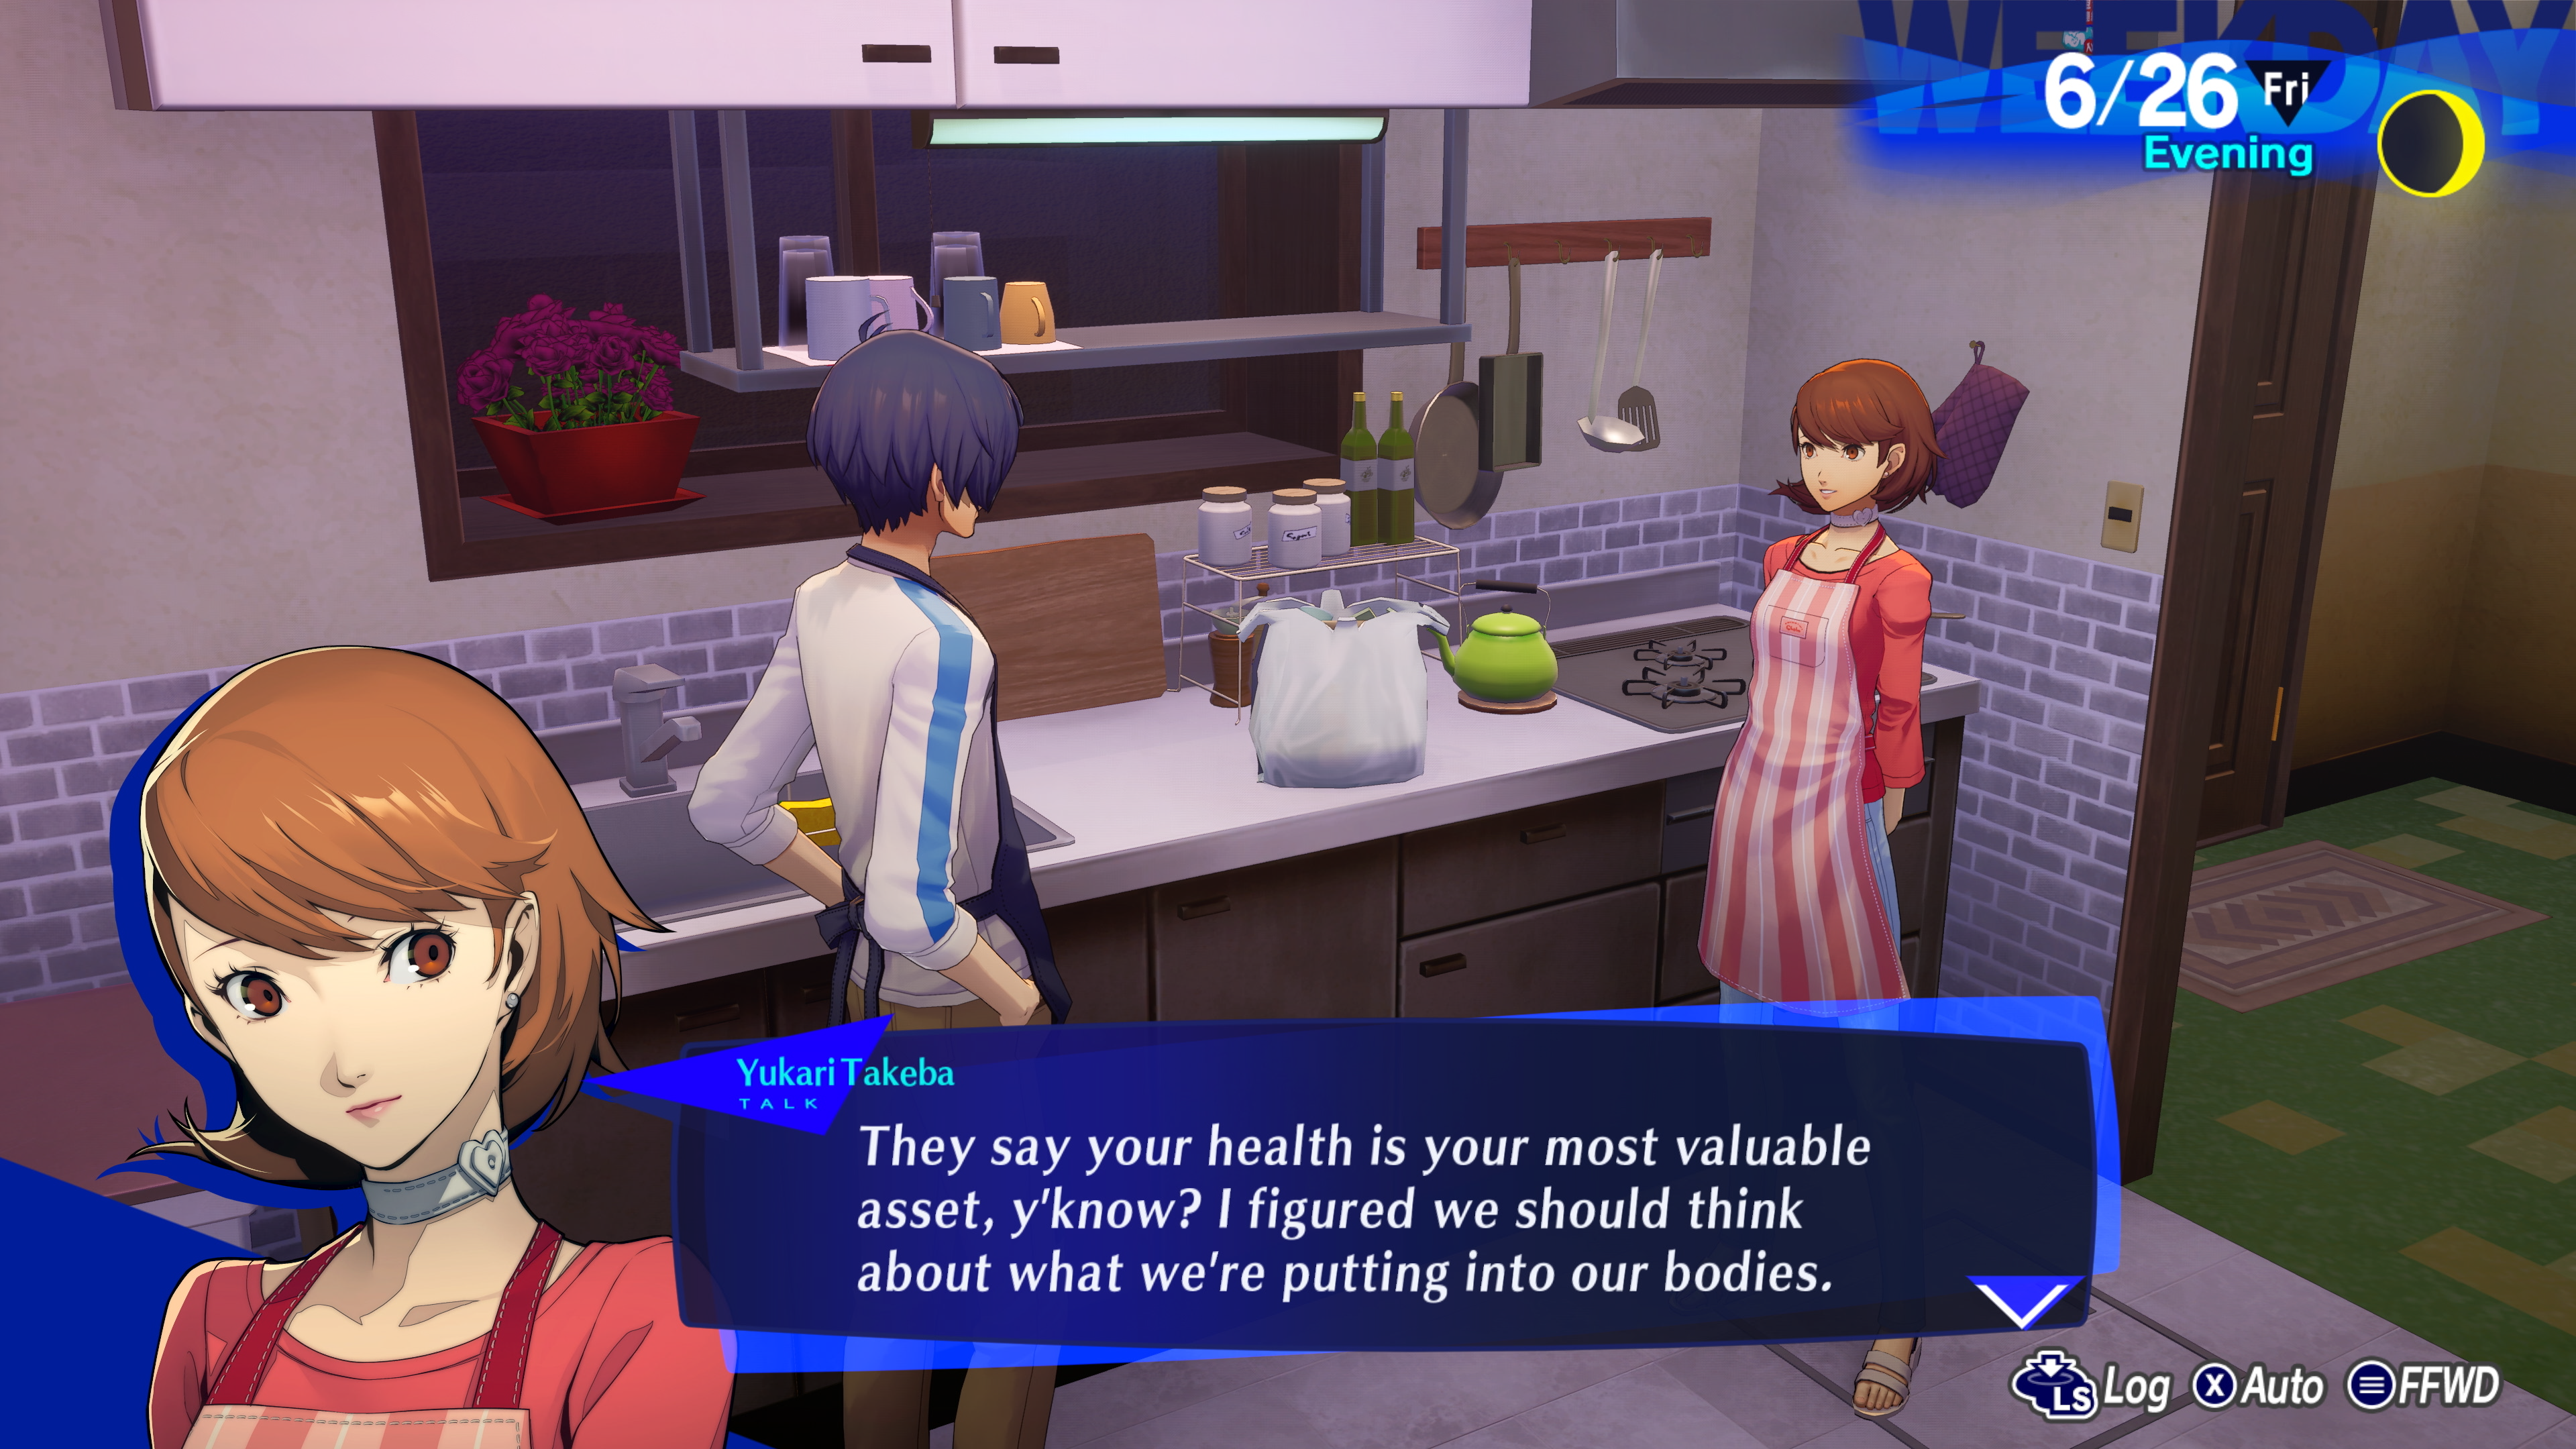 Persona 3 Reload Confirms All-New Story Scenes and Character